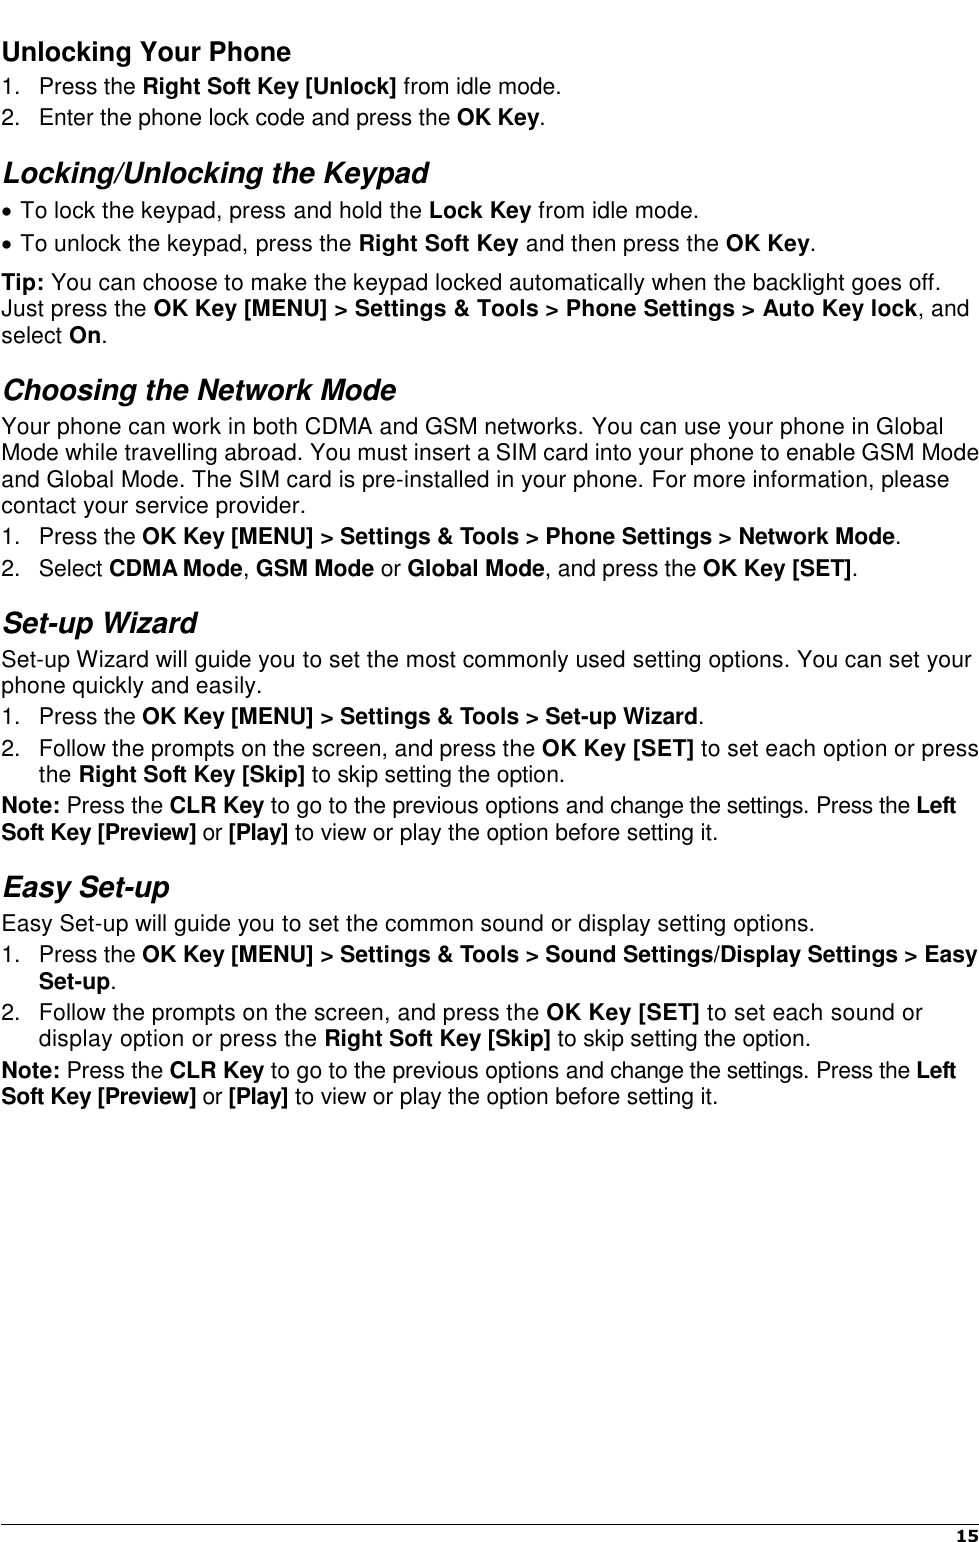    15   Unlocking Your Phone 1.  Press the Right Soft Key [Unlock] from idle mode. 2.  Enter the phone lock code and press the OK Key. Locking/Unlocking the Keypad  To lock the keypad, press and hold the Lock Key from idle mode.  To unlock the keypad, press the Right Soft Key and then press the OK Key. Tip: You can choose to make the keypad locked automatically when the backlight goes off. Just press the OK Key [MENU] &gt; Settings &amp; Tools &gt; Phone Settings &gt; Auto Key lock, and select On. Choosing the Network Mode Your phone can work in both CDMA and GSM networks. You can use your phone in Global Mode while travelling abroad. You must insert a SIM card into your phone to enable GSM Mode and Global Mode. The SIM card is pre-installed in your phone. For more information, please contact your service provider. 1.  Press the OK Key [MENU] &gt; Settings &amp; Tools &gt; Phone Settings &gt; Network Mode. 2.  Select CDMA Mode, GSM Mode or Global Mode, and press the OK Key [SET]. Set-up Wizard Set-up Wizard will guide you to set the most commonly used setting options. You can set your phone quickly and easily. 1.  Press the OK Key [MENU] &gt; Settings &amp; Tools &gt; Set-up Wizard.   2.  Follow the prompts on the screen, and press the OK Key [SET] to set each option or press the Right Soft Key [Skip] to skip setting the option.   Note: Press the CLR Key to go to the previous options and change the settings. Press the Left Soft Key [Preview] or [Play] to view or play the option before setting it. Easy Set-up Easy Set-up will guide you to set the common sound or display setting options. 1.  Press the OK Key [MENU] &gt; Settings &amp; Tools &gt; Sound Settings/Display Settings &gt; Easy Set-up.   2.  Follow the prompts on the screen, and press the OK Key [SET] to set each sound or display option or press the Right Soft Key [Skip] to skip setting the option.   Note: Press the CLR Key to go to the previous options and change the settings. Press the Left Soft Key [Preview] or [Play] to view or play the option before setting it.           